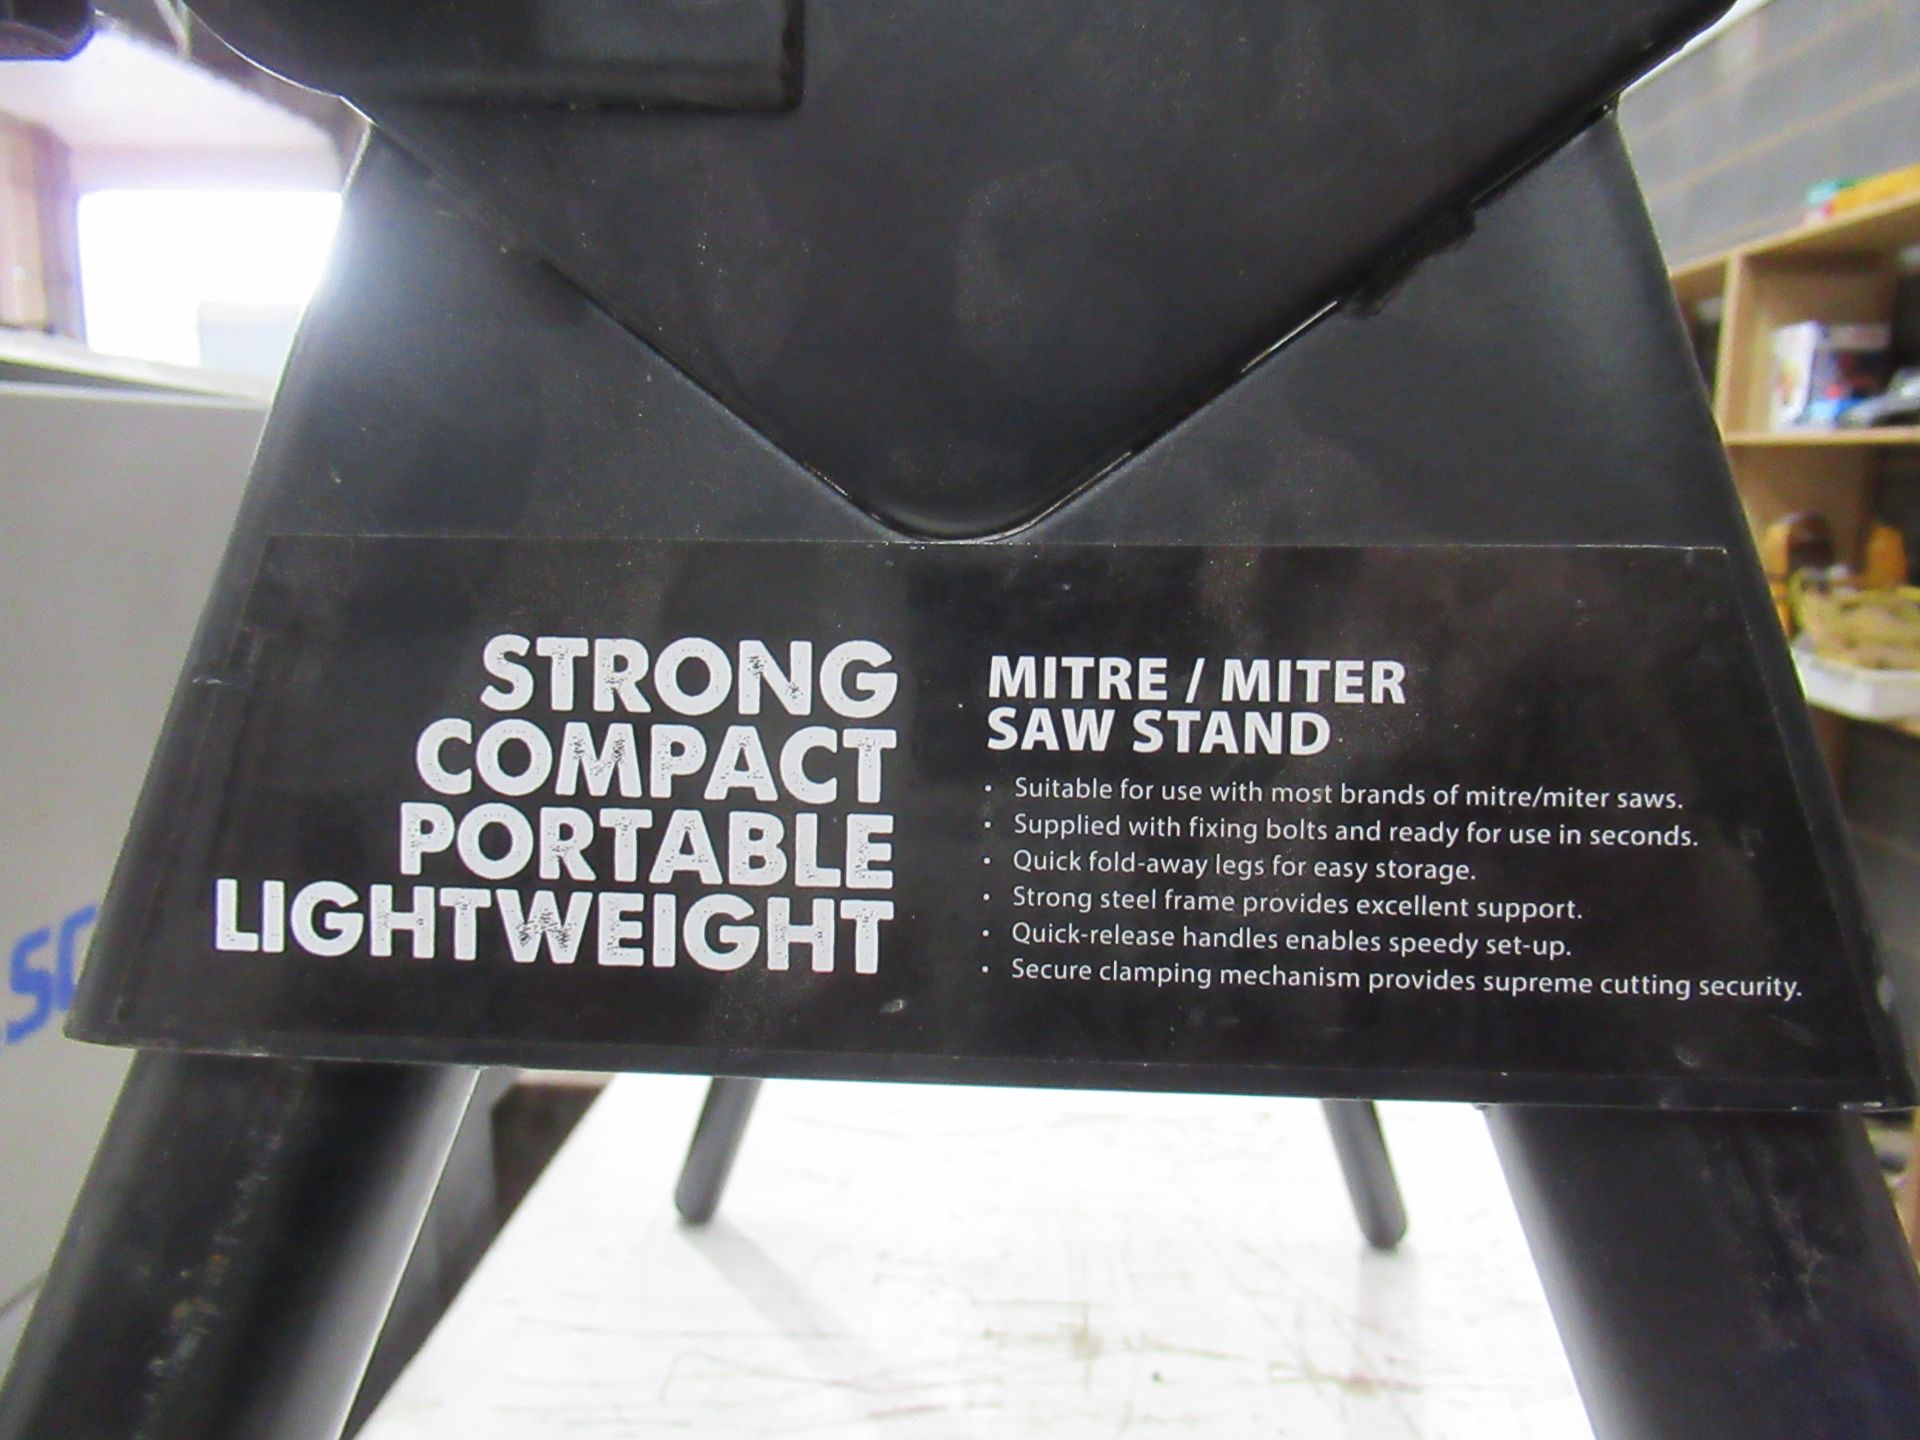 An Evolution, Compact Portable Lightweight Mitre Saw Stand - Image 2 of 9